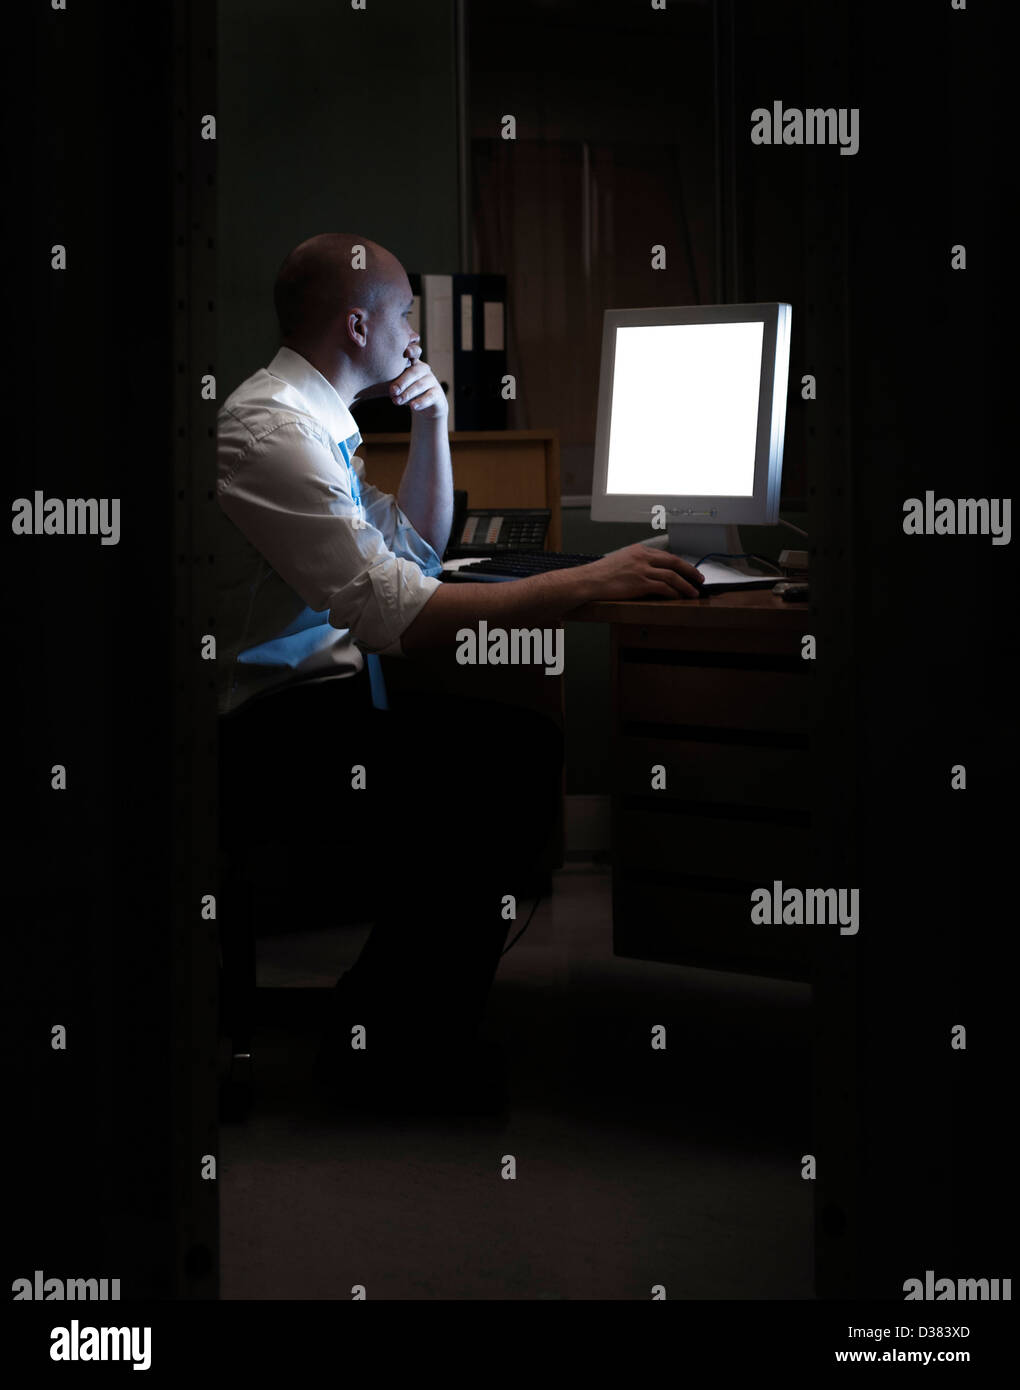 Late night office worker working overtime. White collar worker working on computer at night in dark office. Stock Photo